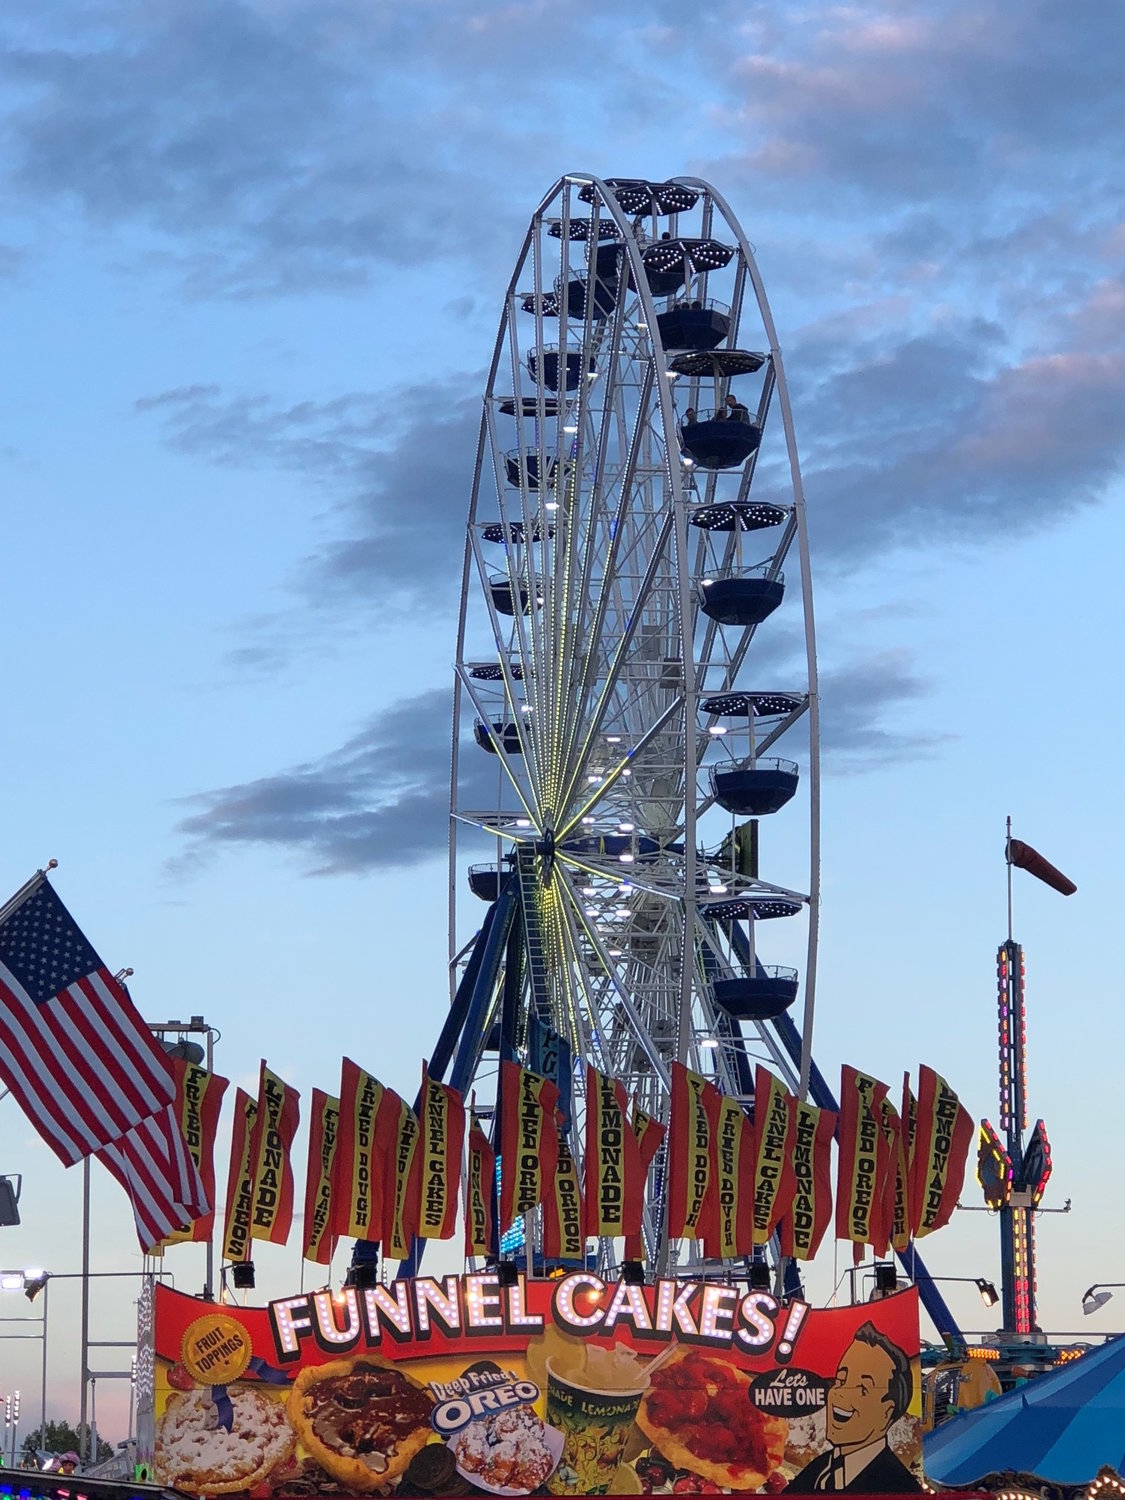 The giant Ferris wheel commands attention throughout the fairgrounds.